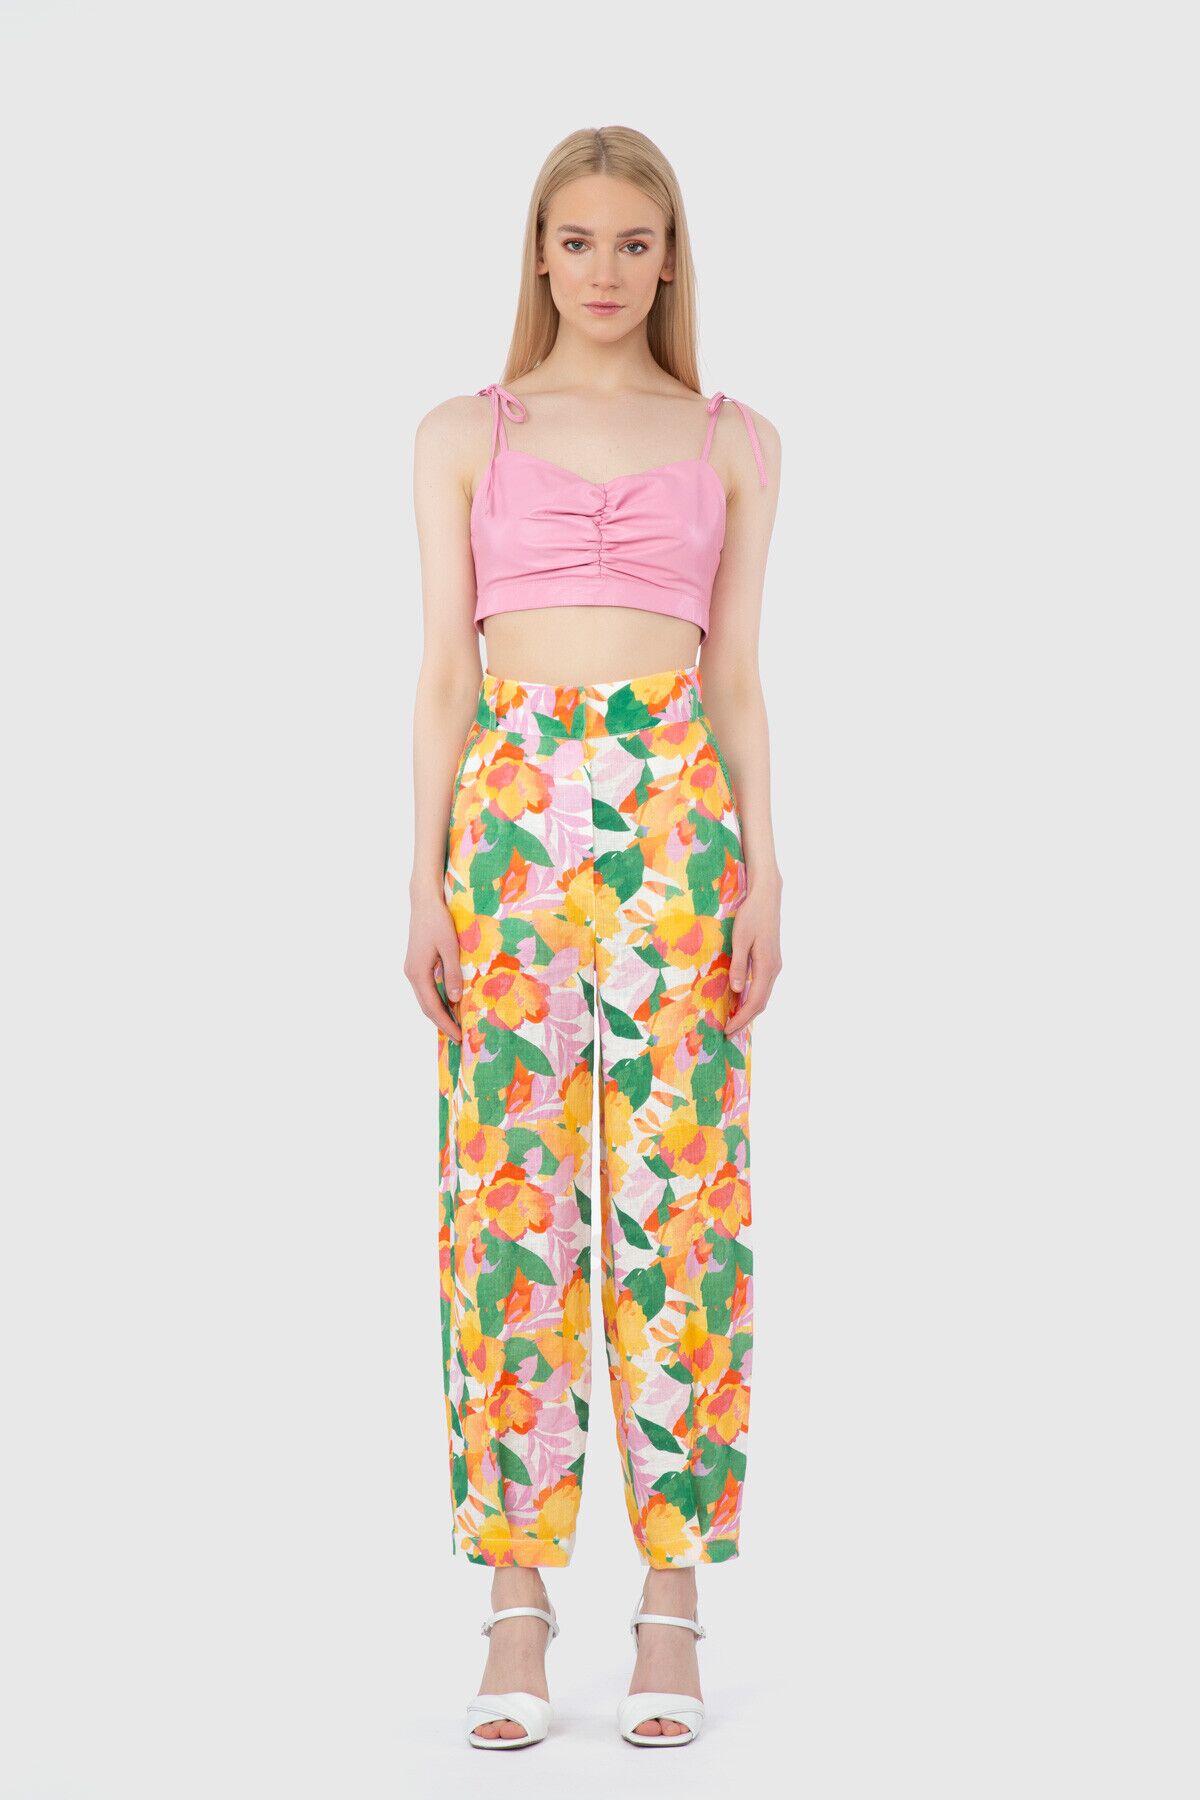  GIZIA - Floral Patterned Orange Trousers